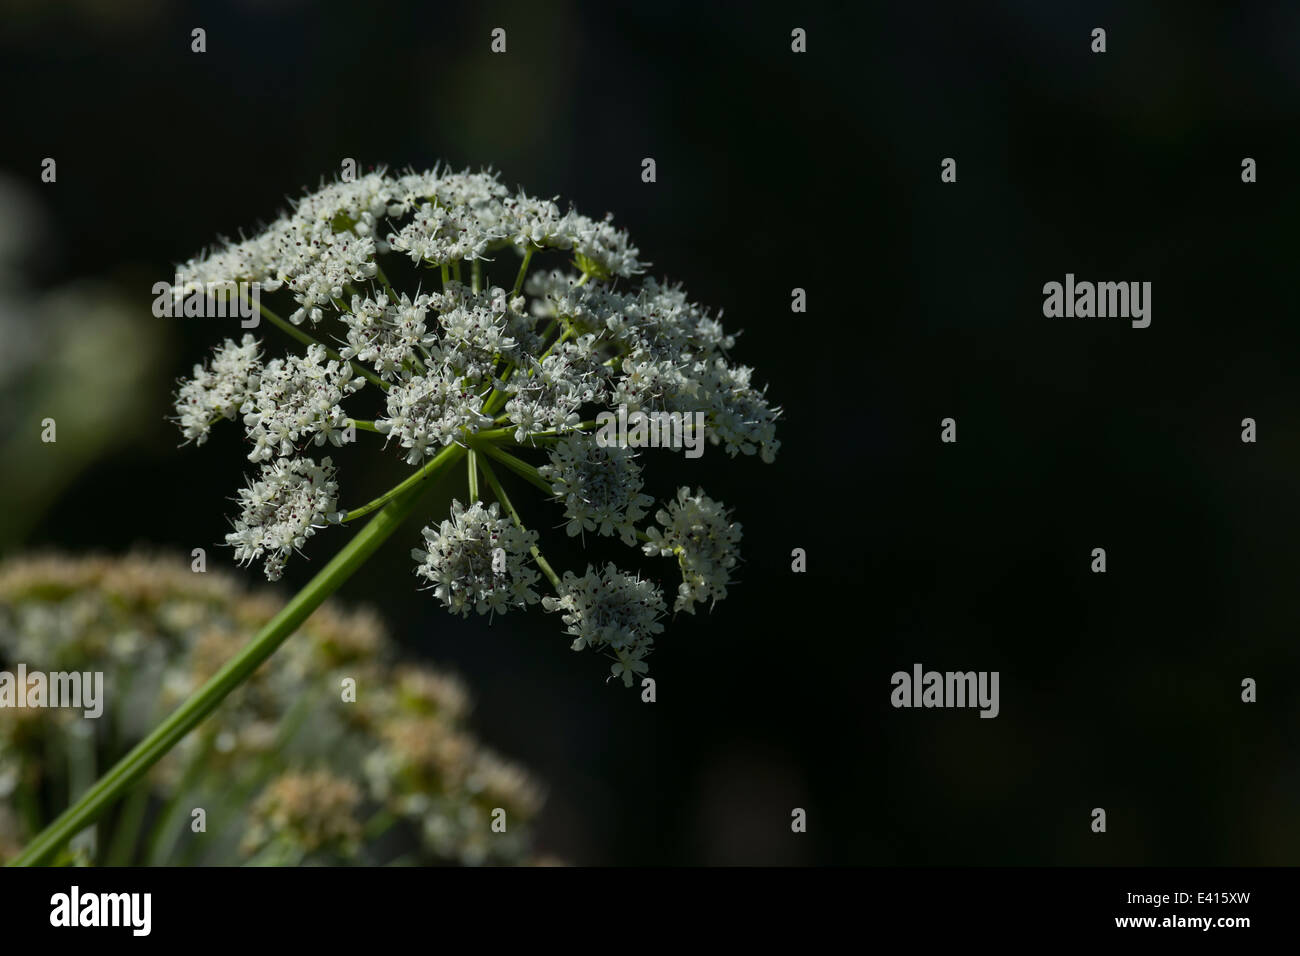 White flower head / flowers of the poisonous umbellifer Hemlock Water Dropwort / Oenanthe crocata. One of UK's most poisonous plants. Stock Photo